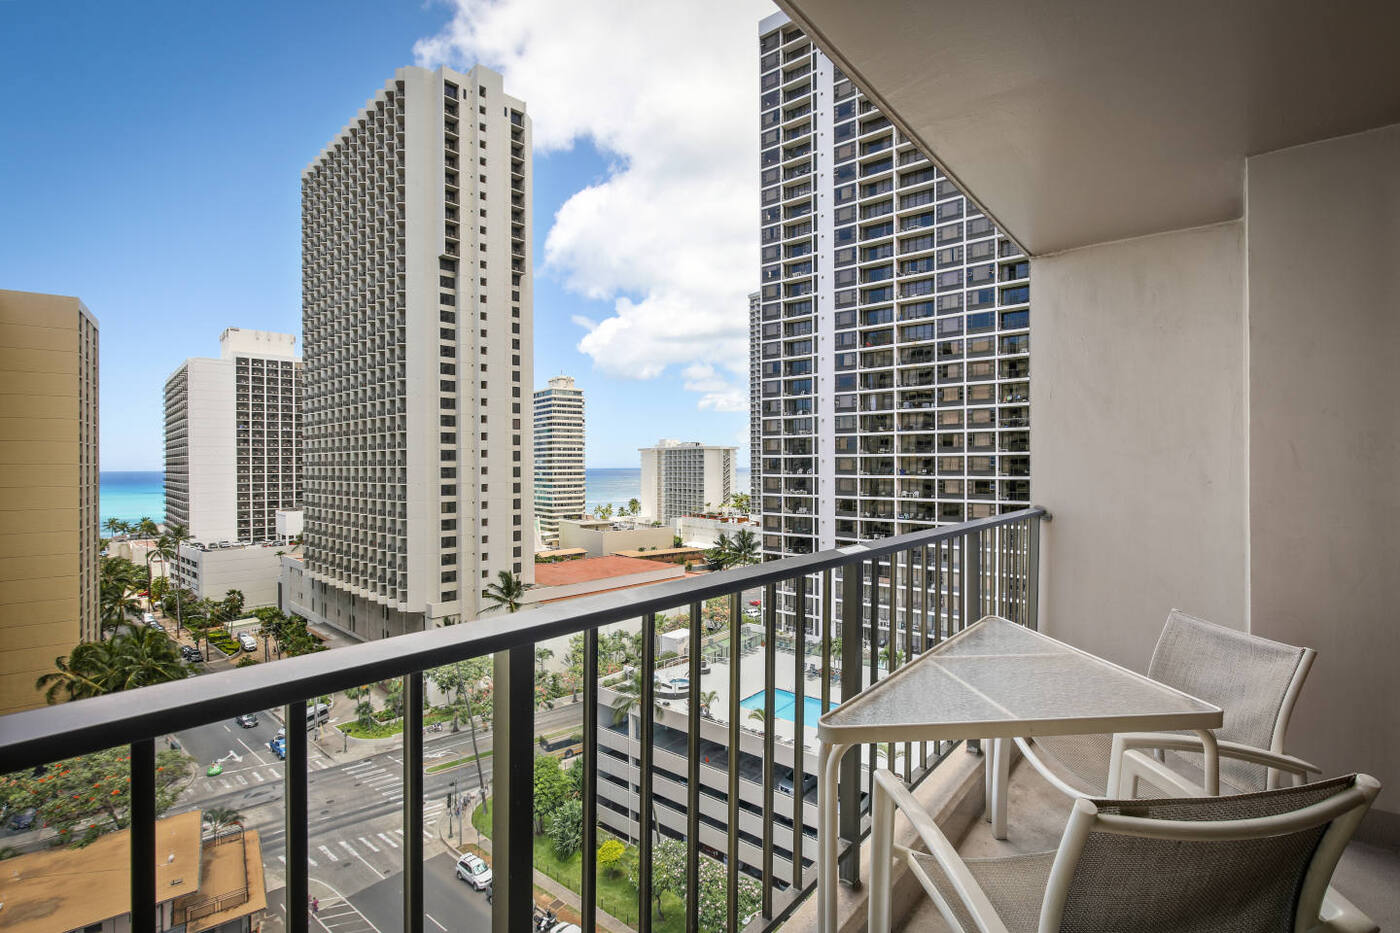 Aston Waikiki Sunset 1Bedroom Partial Ocean View Balcony with seating to enjoy the view